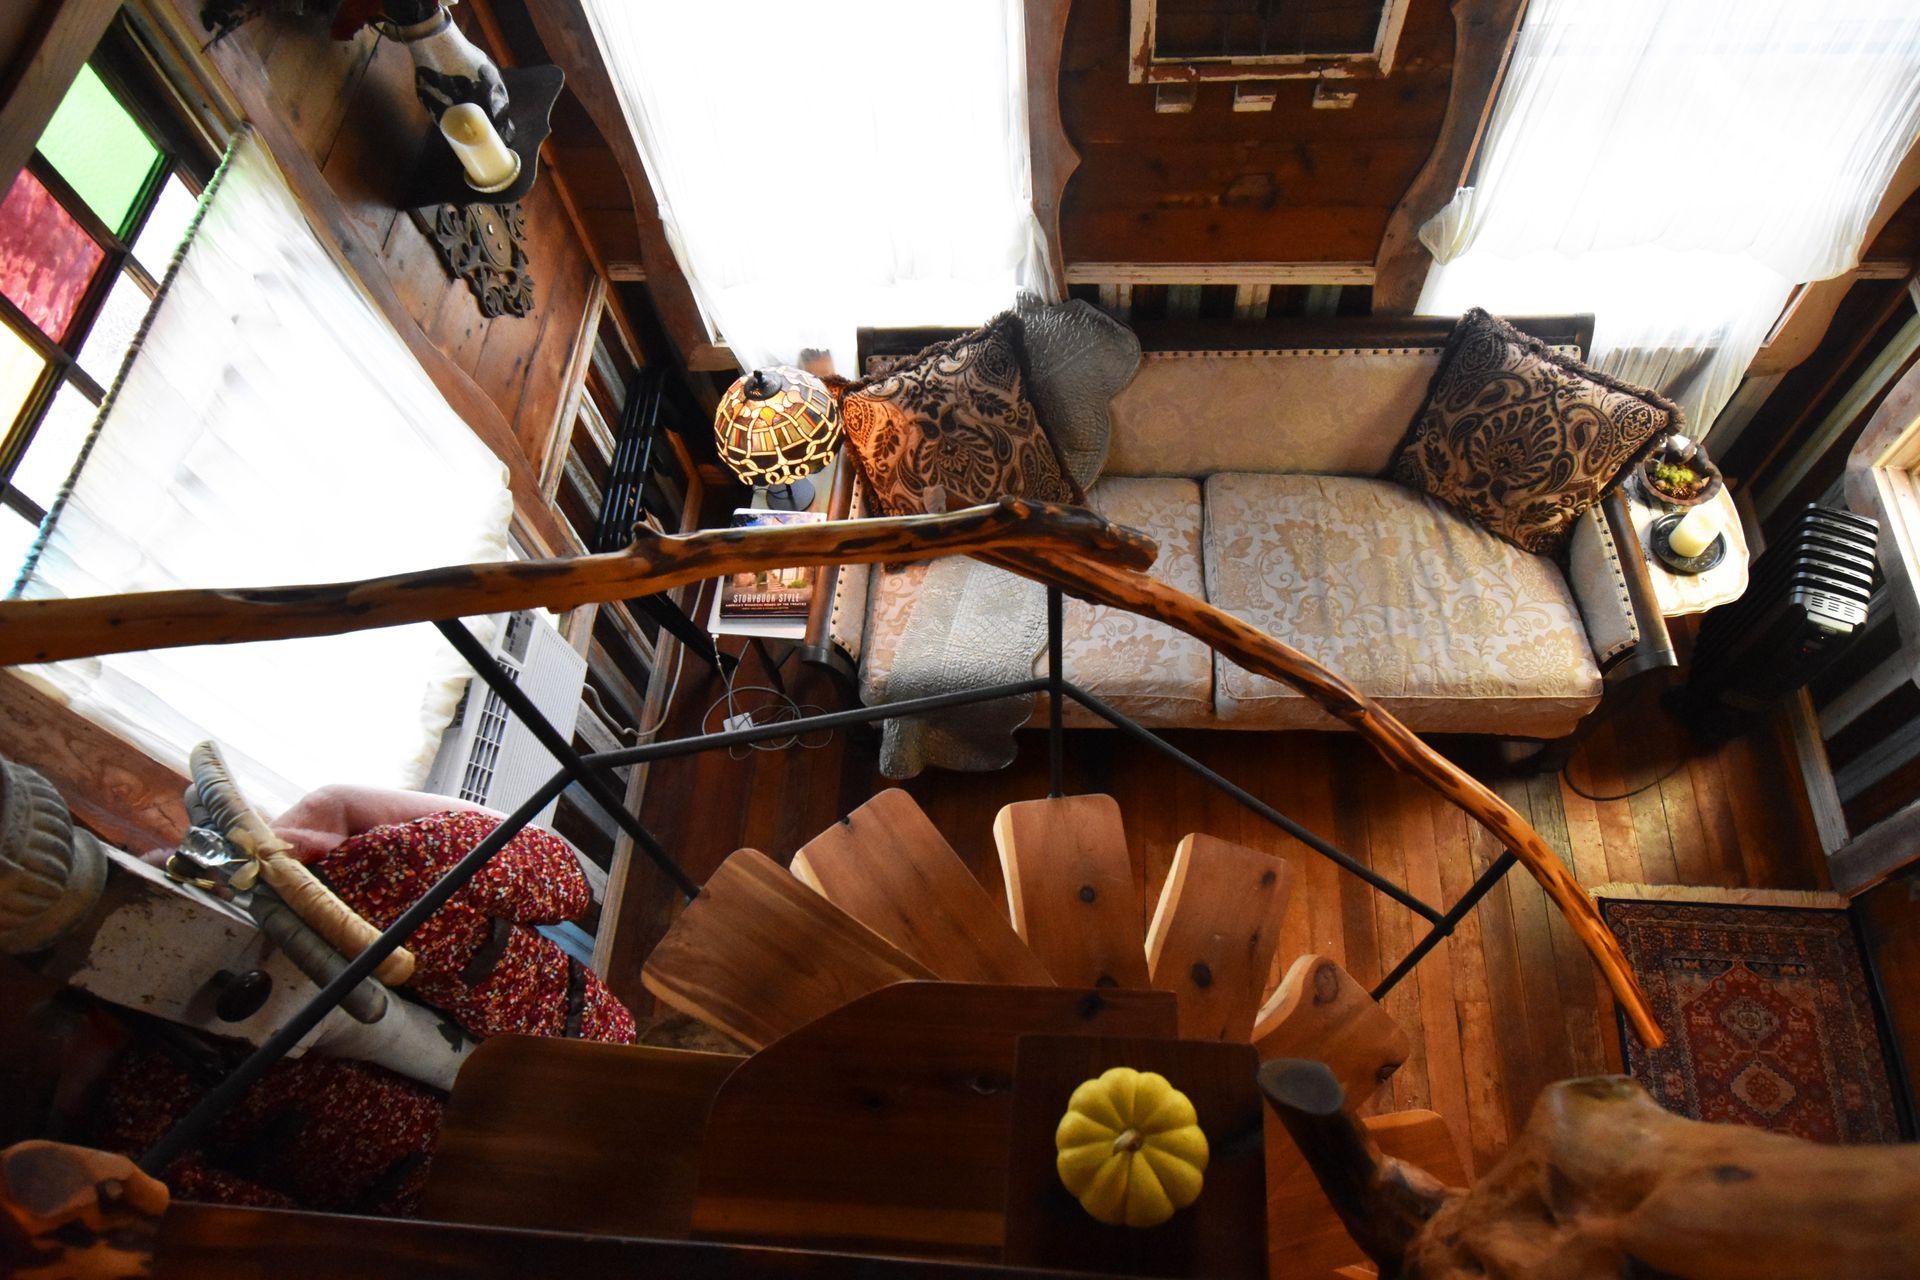 Looking down from the loft in Havenwald. There is a spiral staircase, a vintage-looking couch with pillows, wood details and a stained glass lamp.